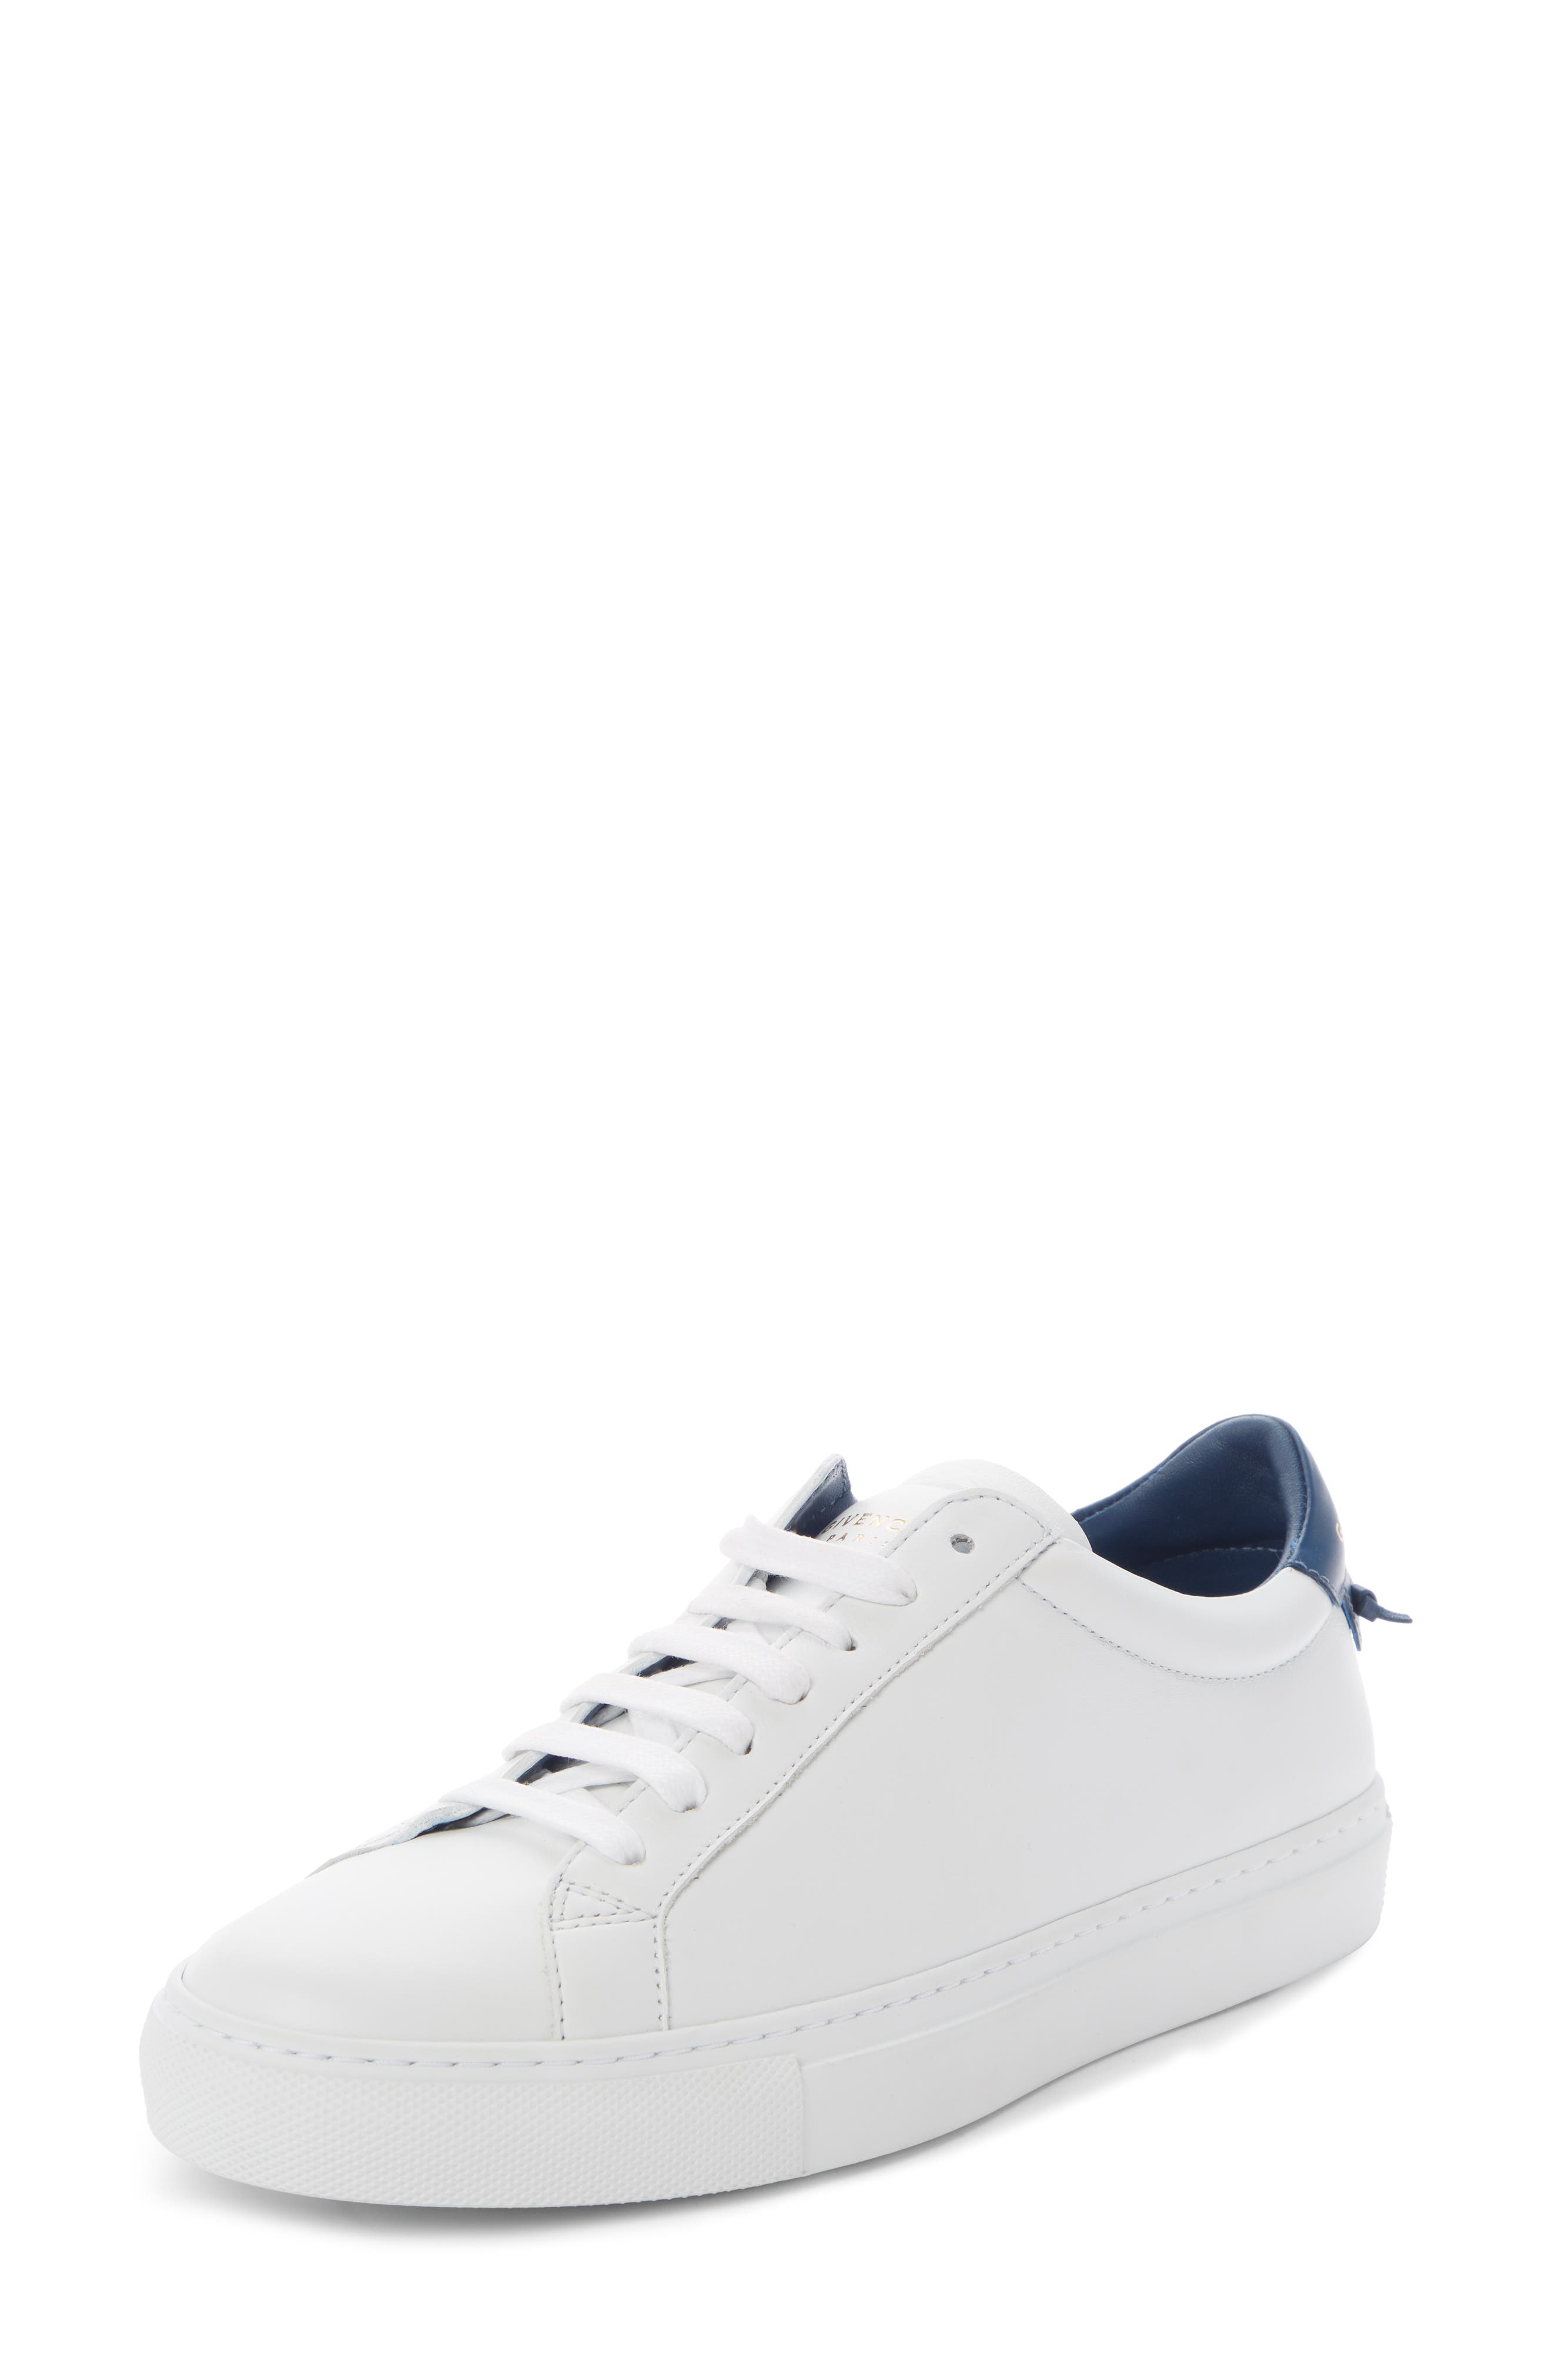 givenchy tennis shoes womens